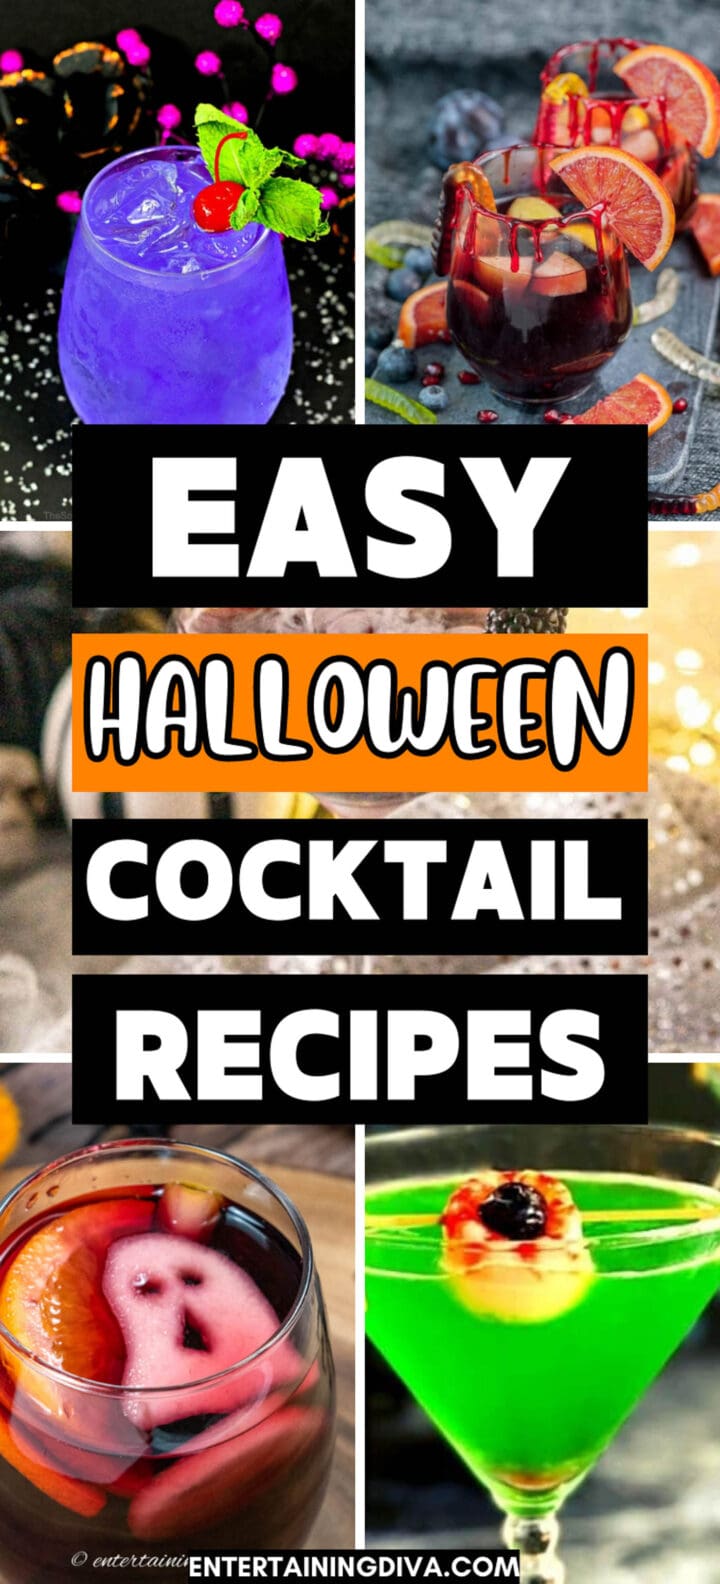 Halloween cocktails made easy.